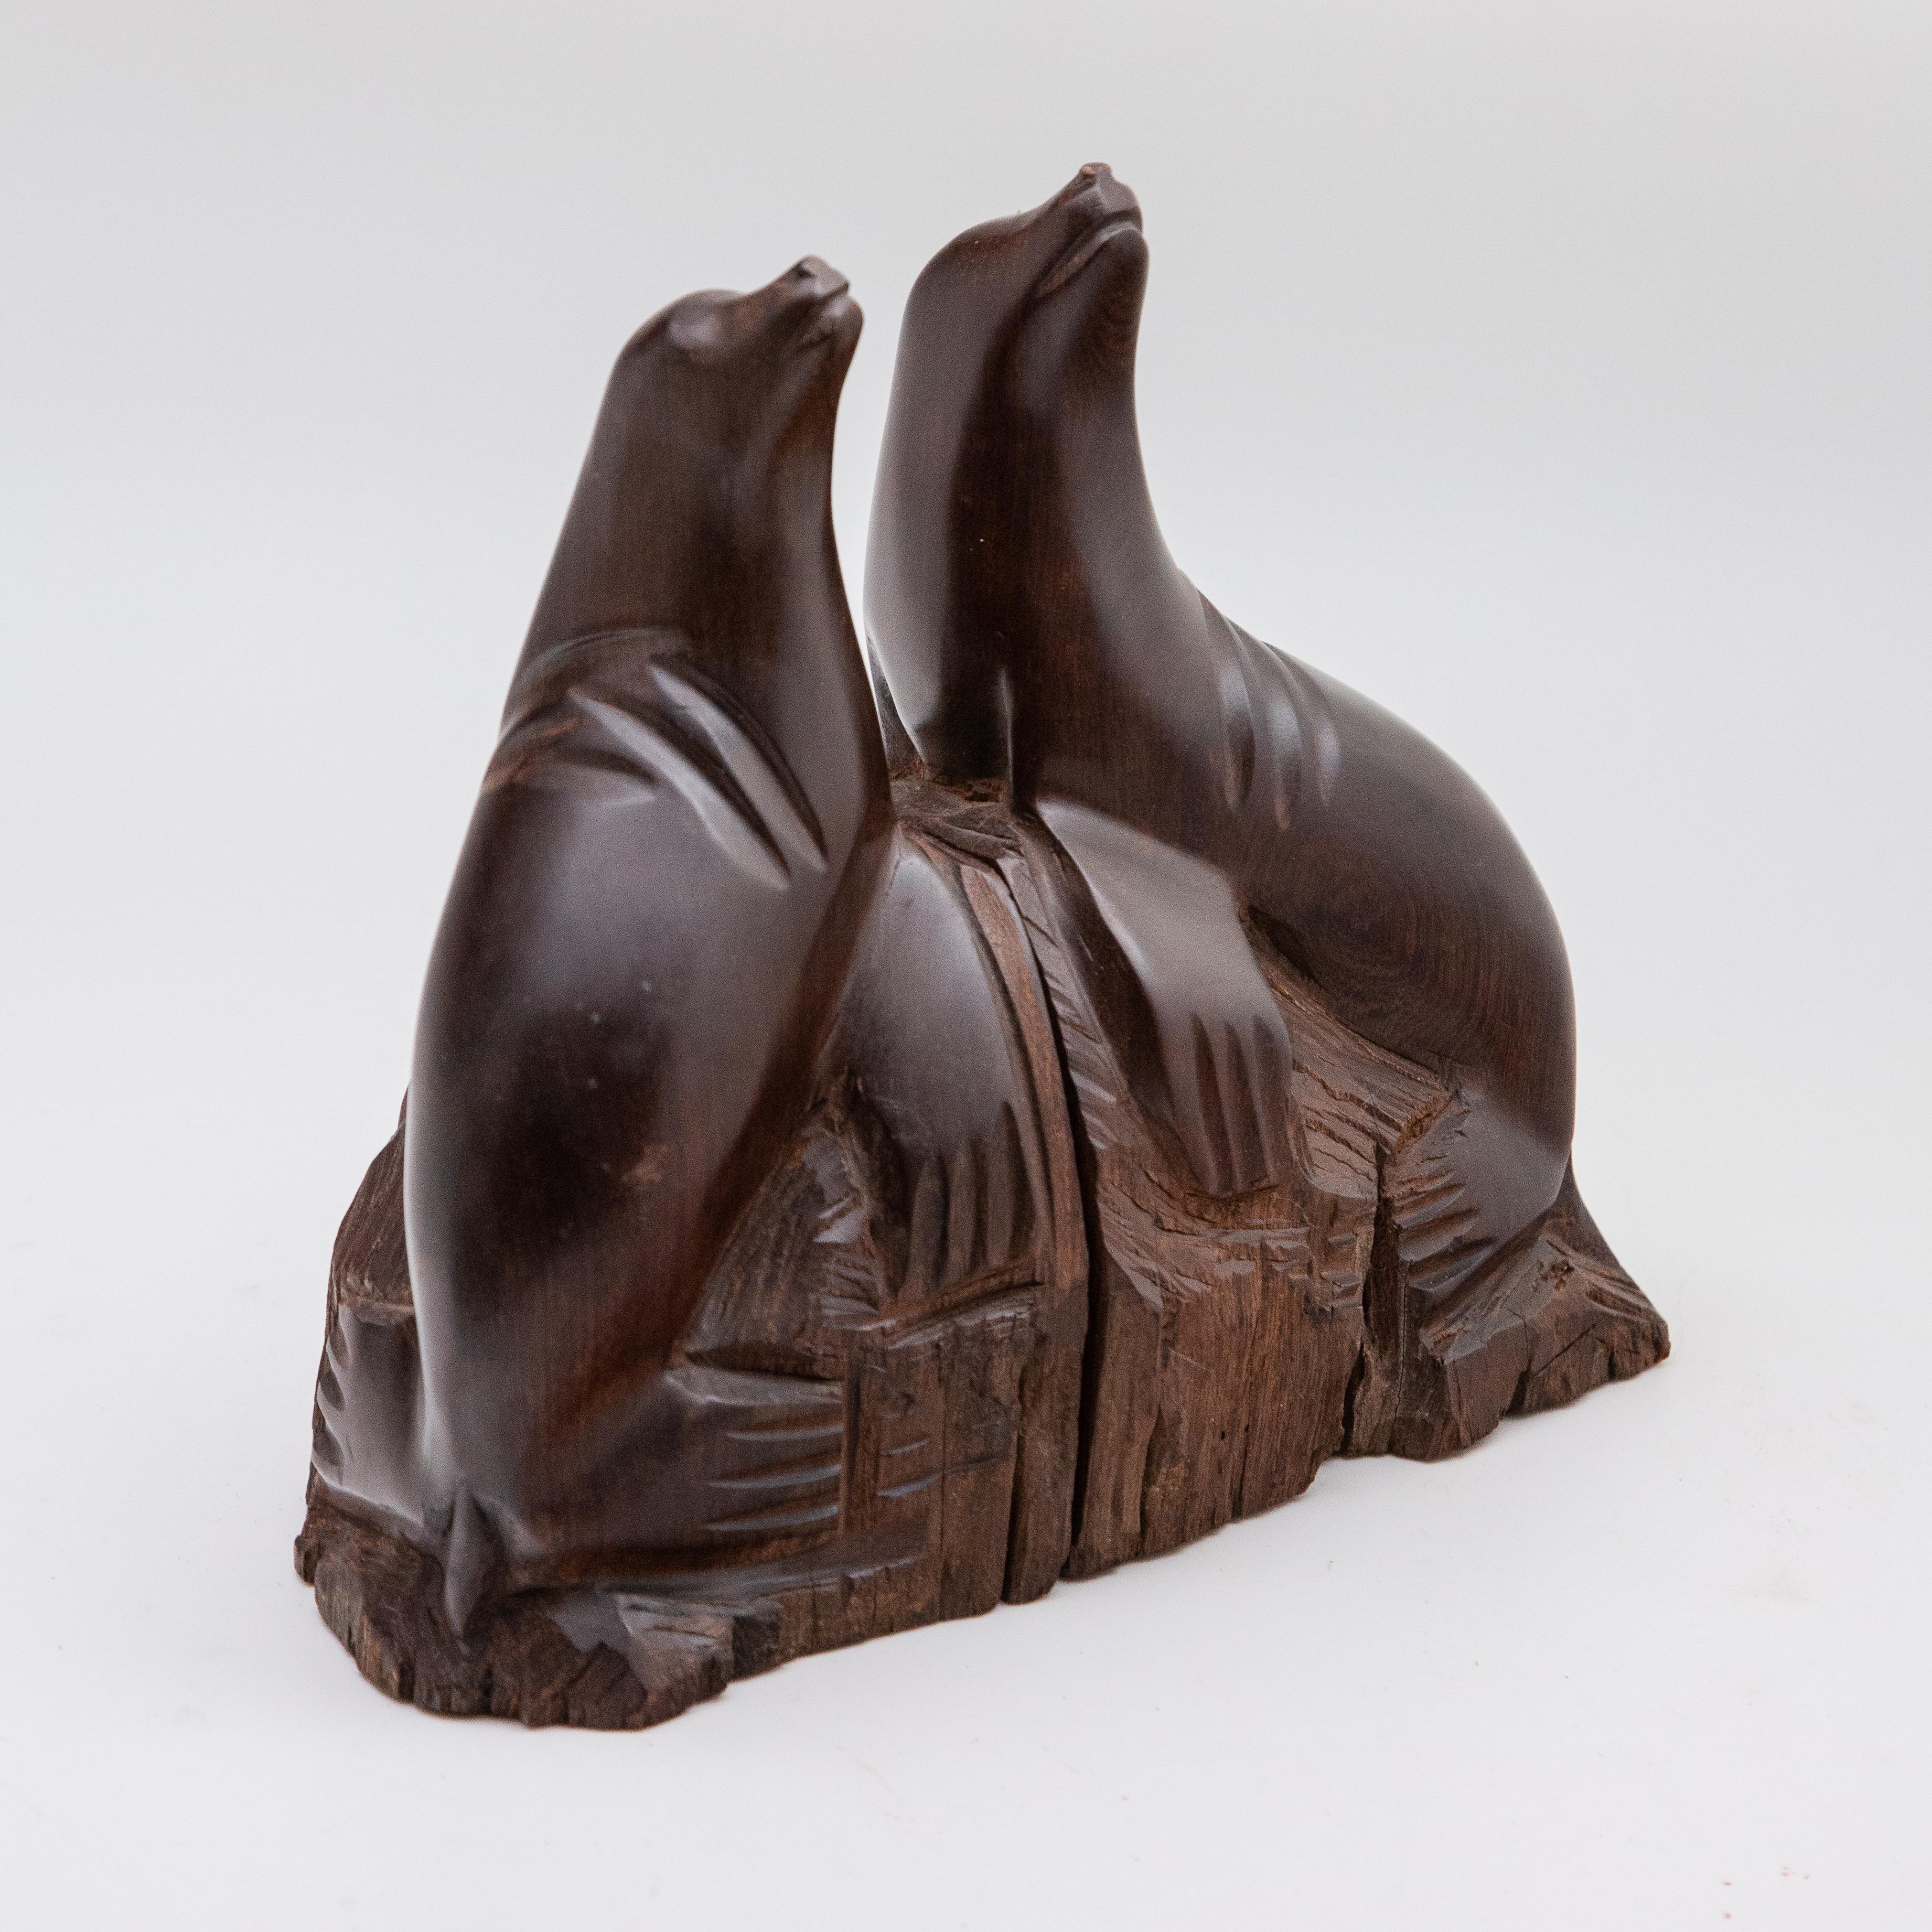 Hardwood Hand-Carved Pair of Ironwood Sea Lion Bookends